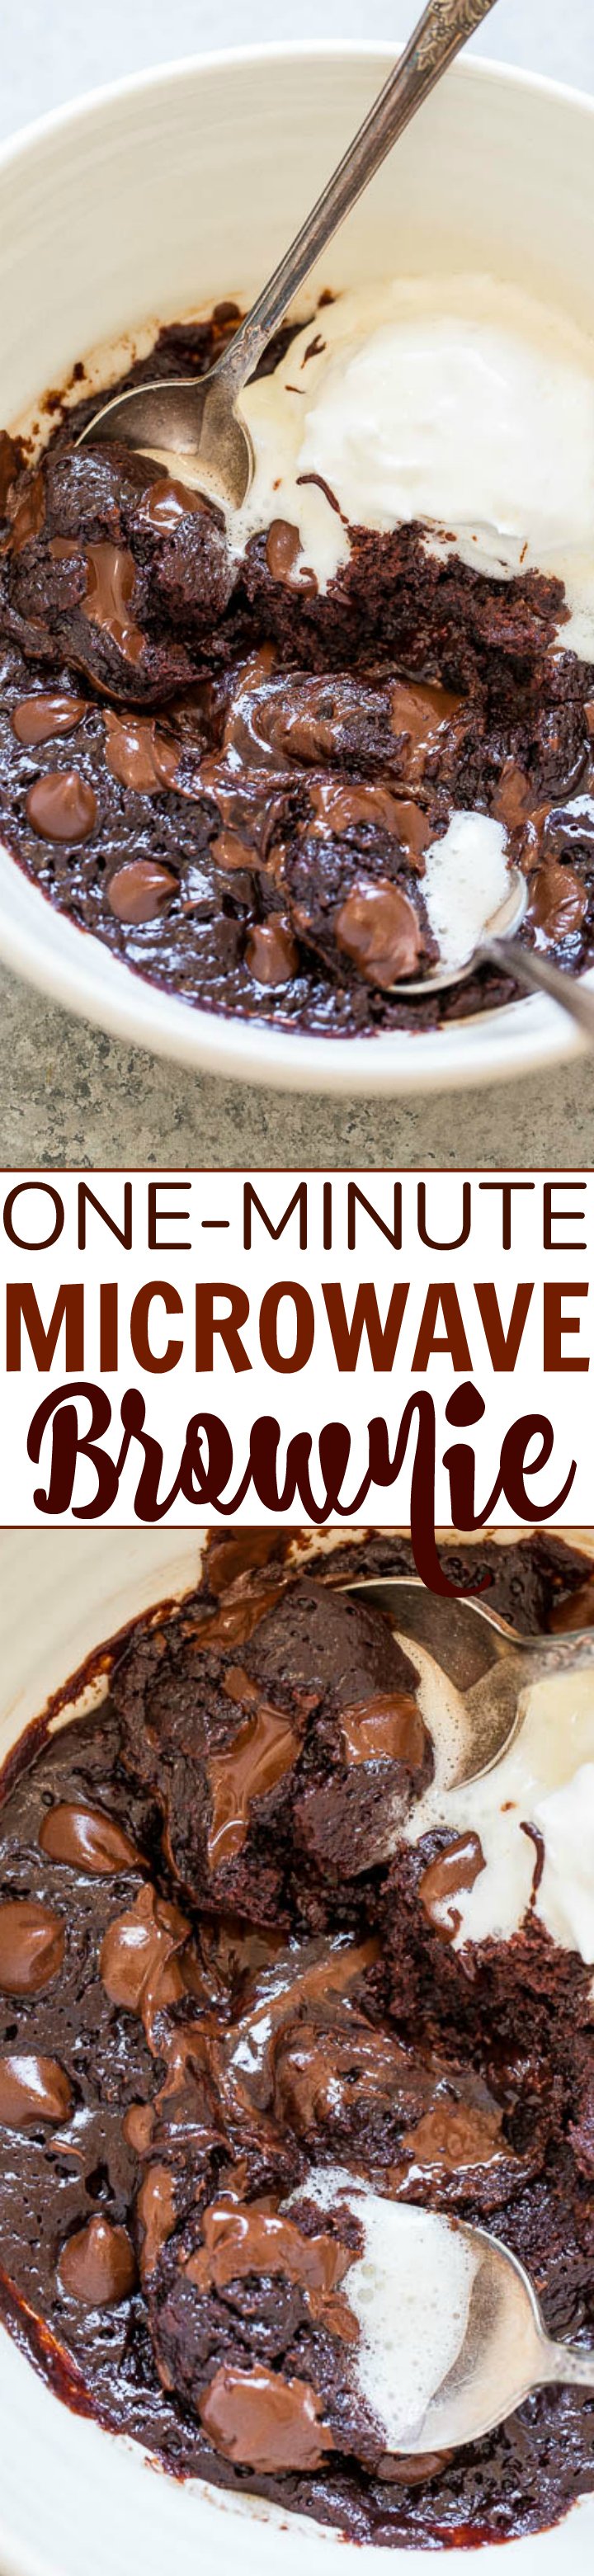 One-Minute Microwave Brownie - When chocolate cravings strike, make this EASY brownie recipe in one bowl, without a mixer, and it's ready in ONE MINUTE!! Rich, FUDGY, decadent, and accidentally vegan!! (no dairy, no butter, no eggs!)